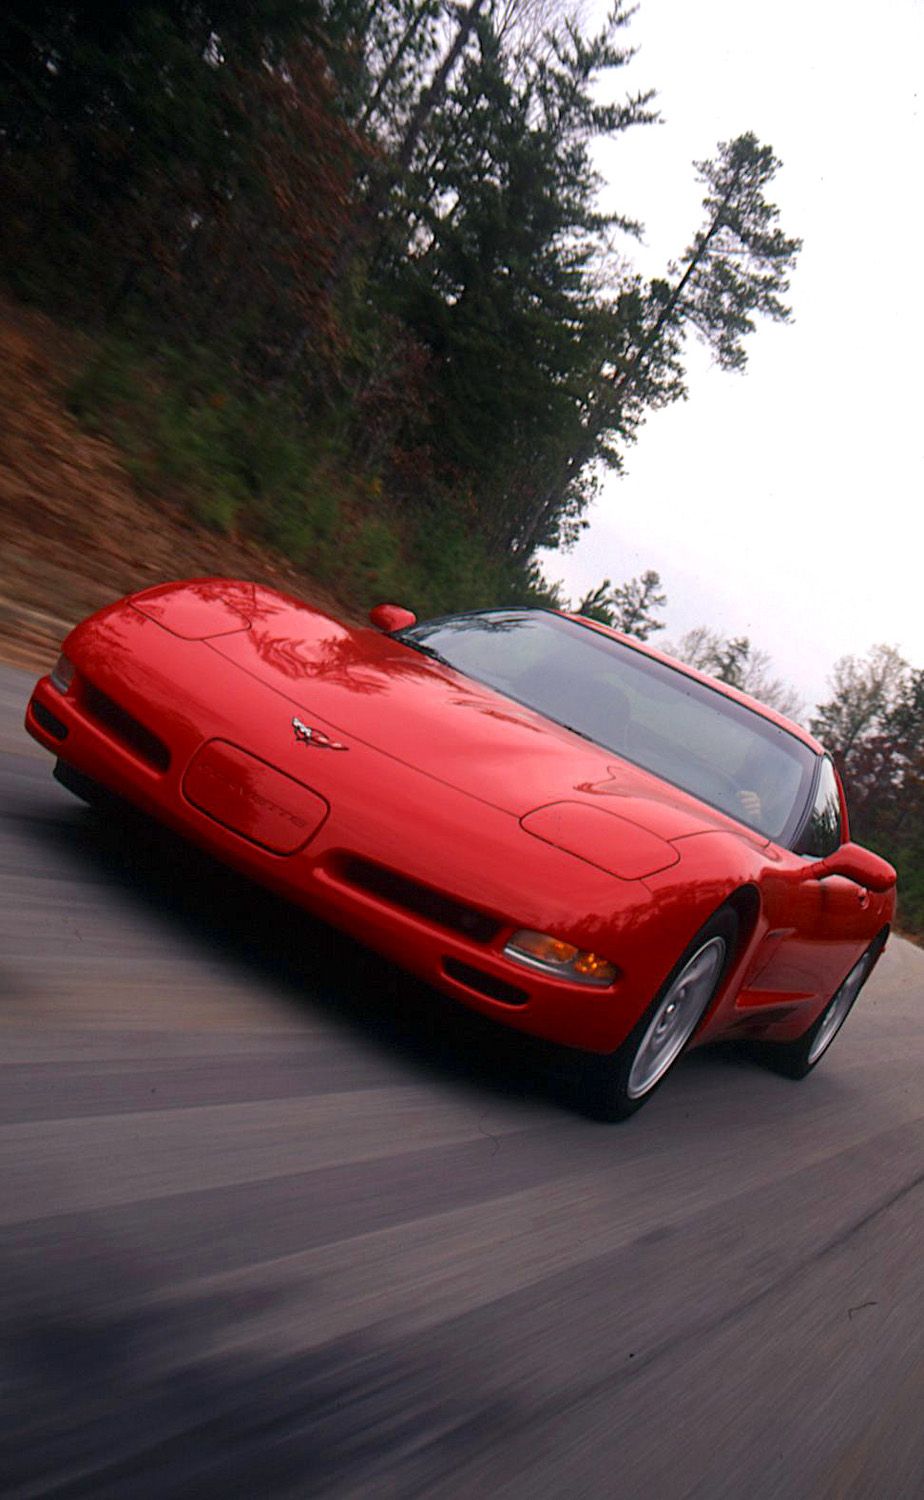 The 1997 Chevrolet C5 Corvette Really Pushed Our Buttons